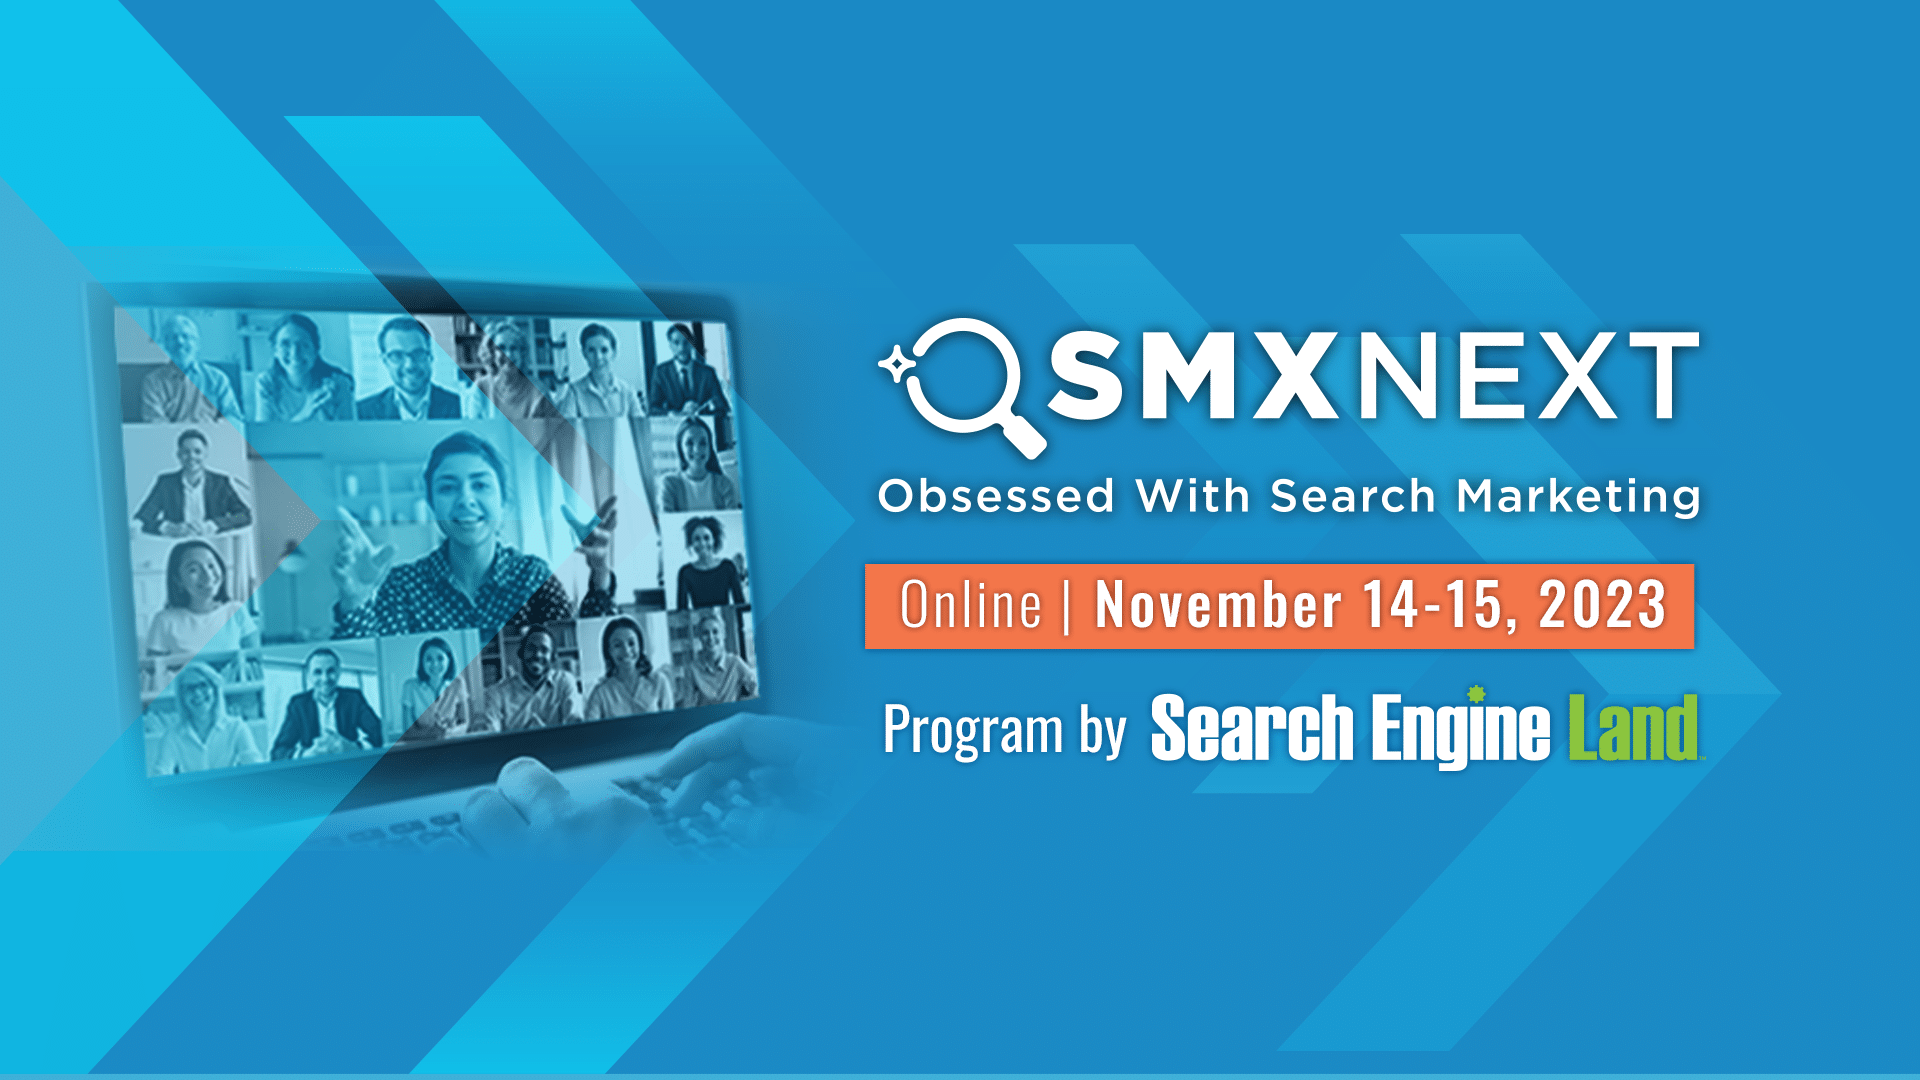 Want to speak at SMX Next? Now’s the time to submit a pitch!